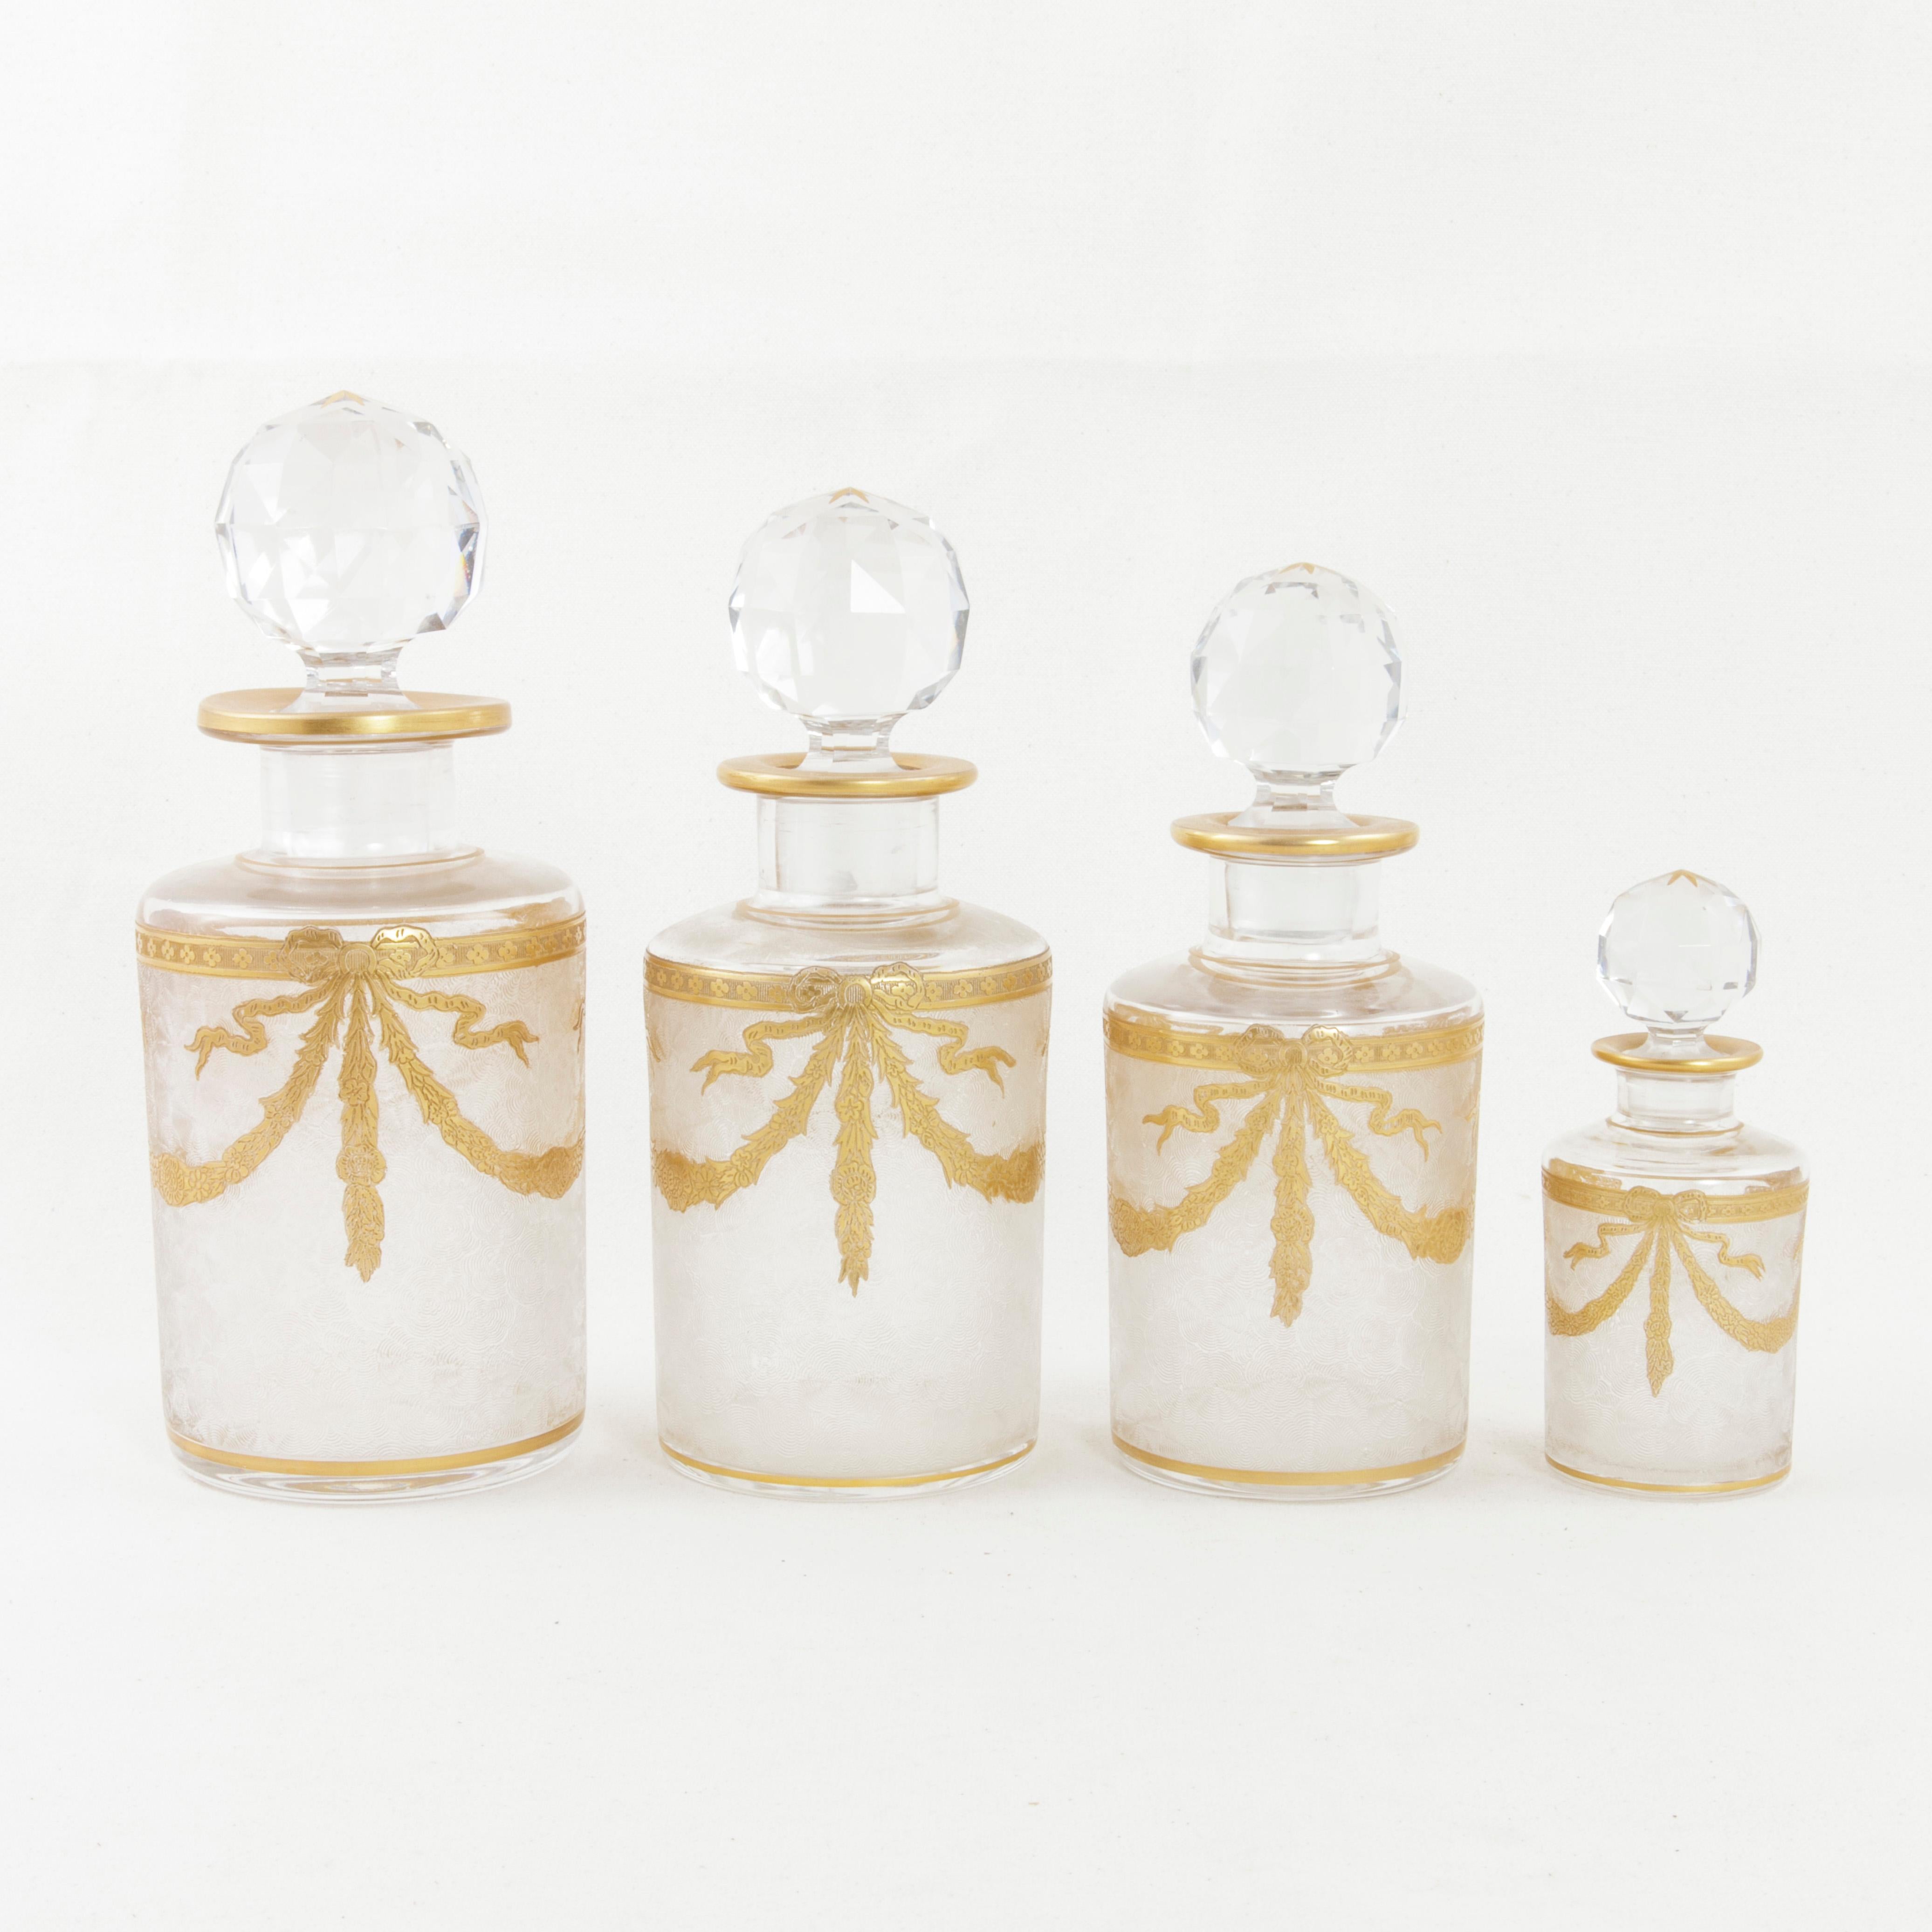 Set of Six Early 20th Century French Baccarat Crystal and Gold Vanity Bottles (Französisch)